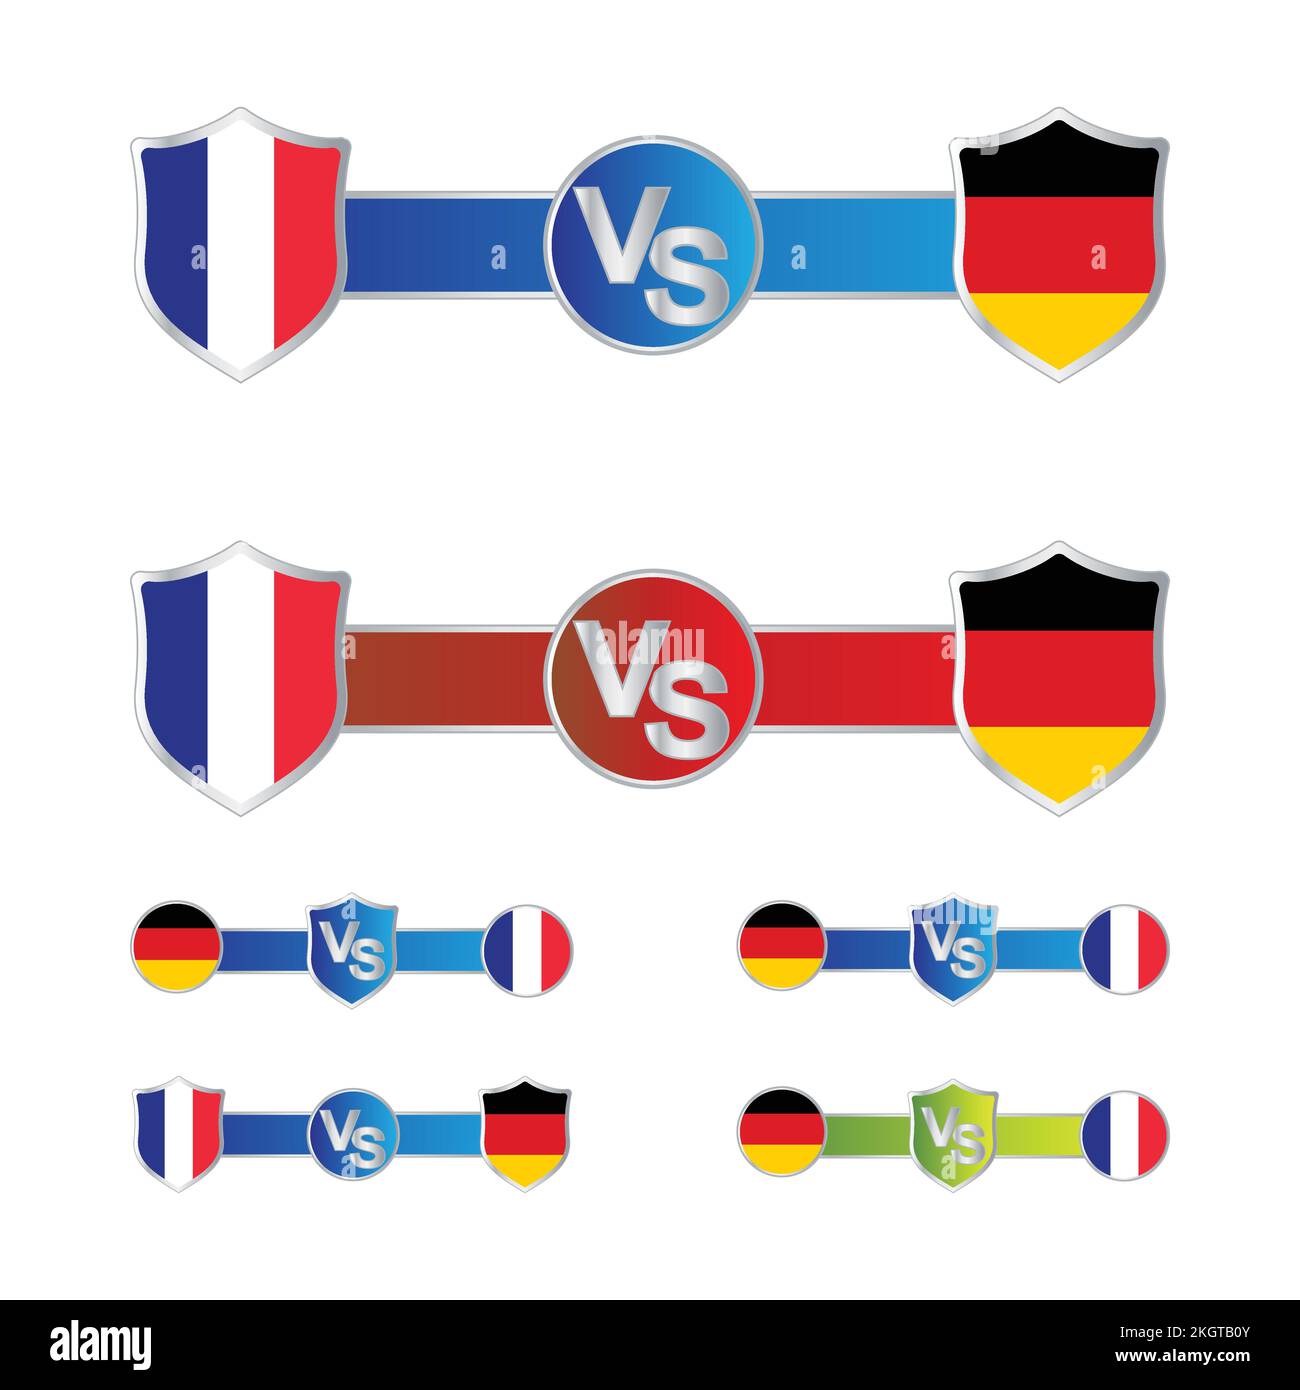 Football match scoreboard. Shield shapes and blue color lower thirds for sports like soccer or football. France VS Germany vector illustration scorebo Stock Vector